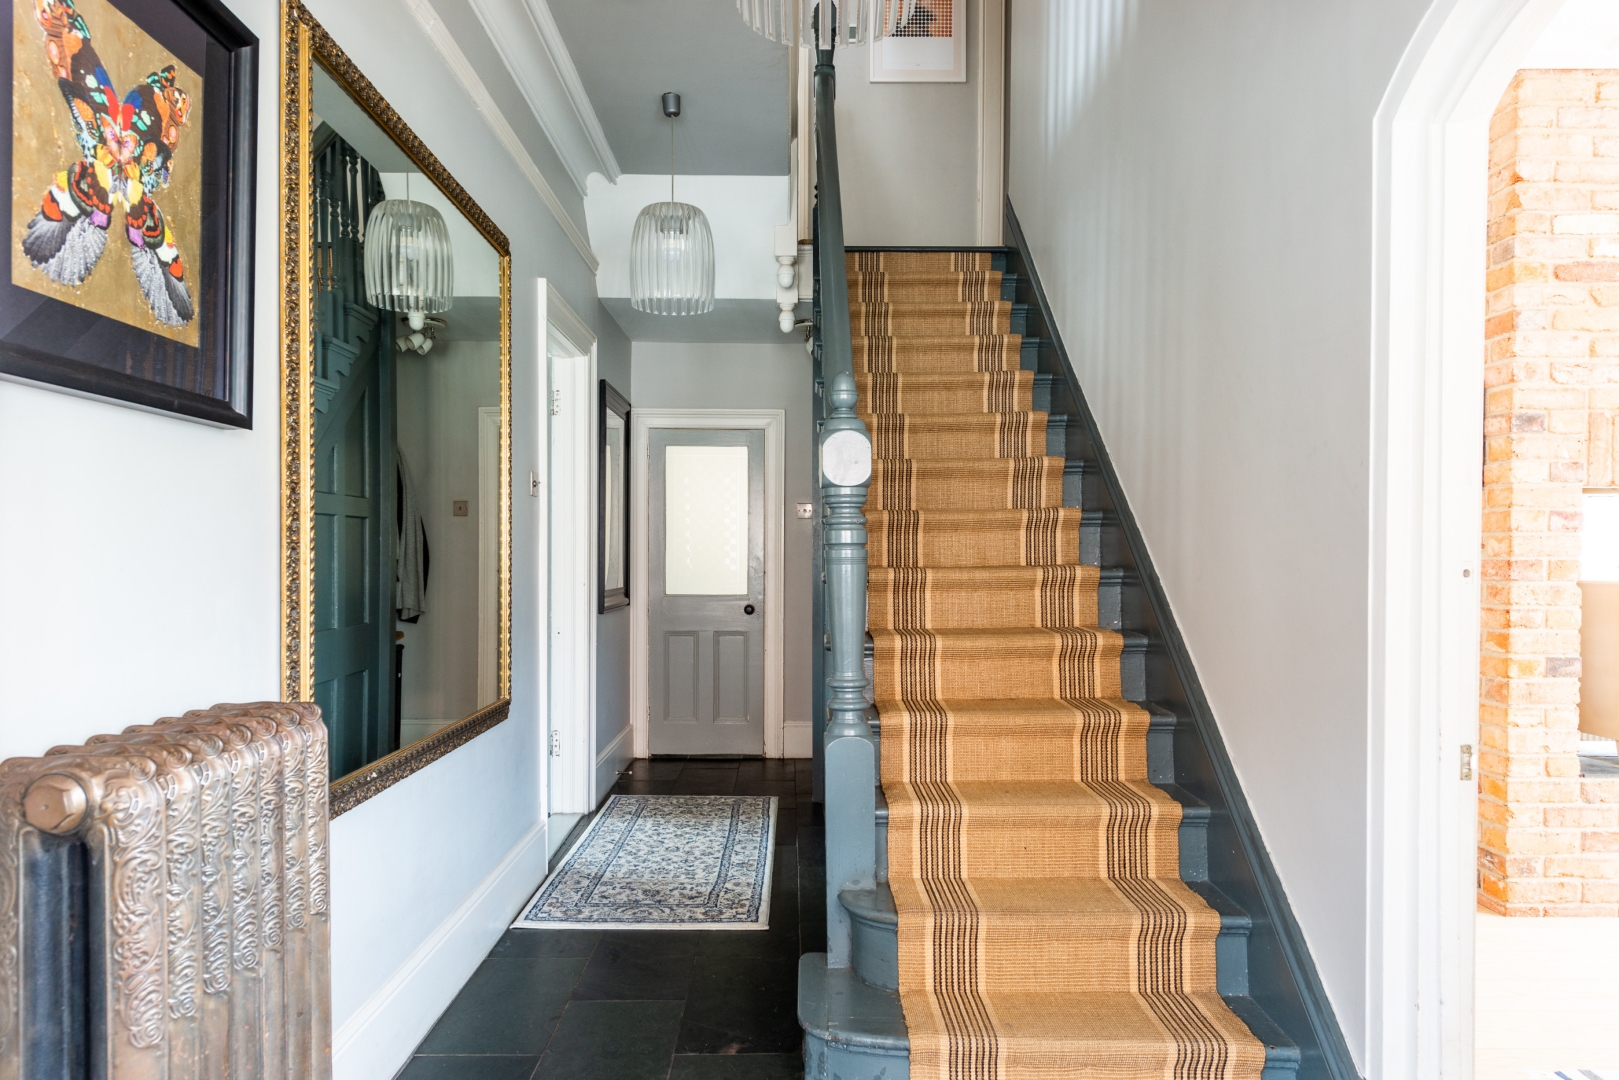 15 Magnificent Traditional Hallway Inspirations for Grand Entries